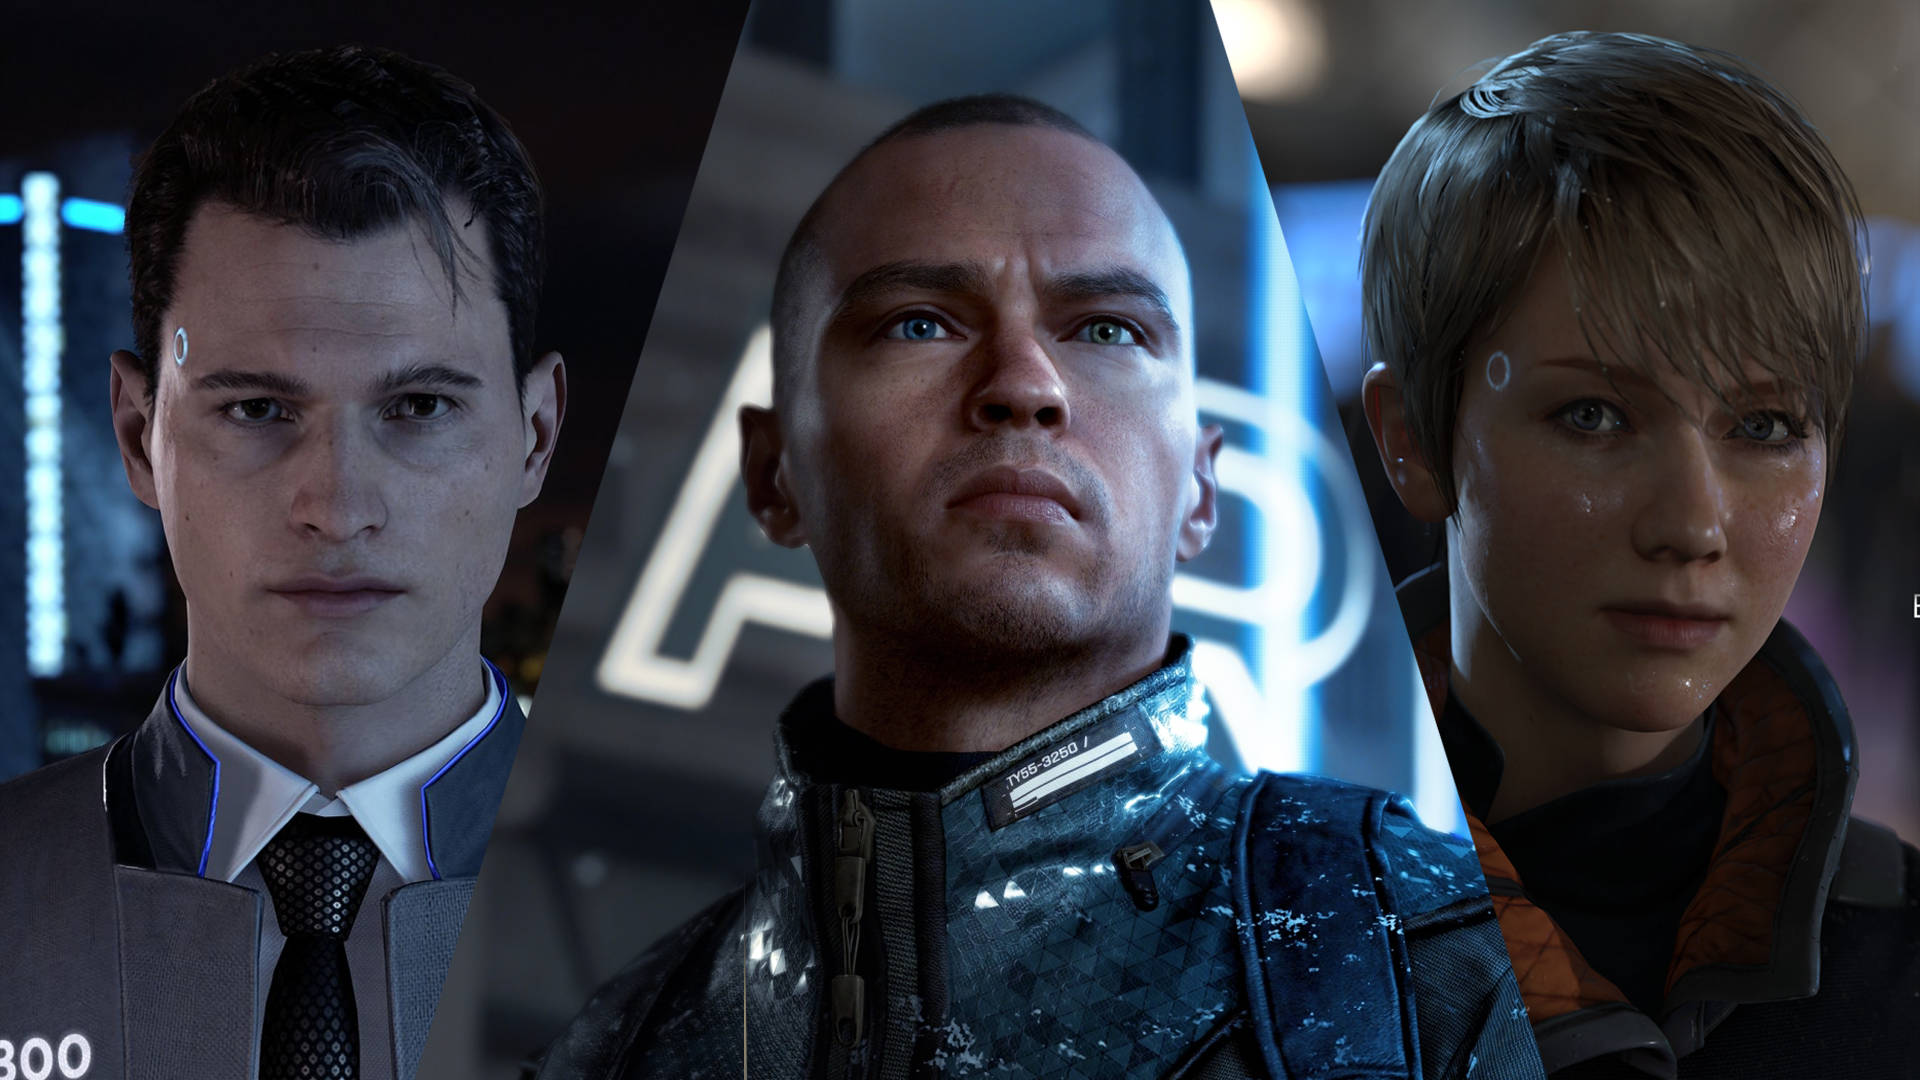 Kara, Marcus, Connor Detroit: Become Human Background